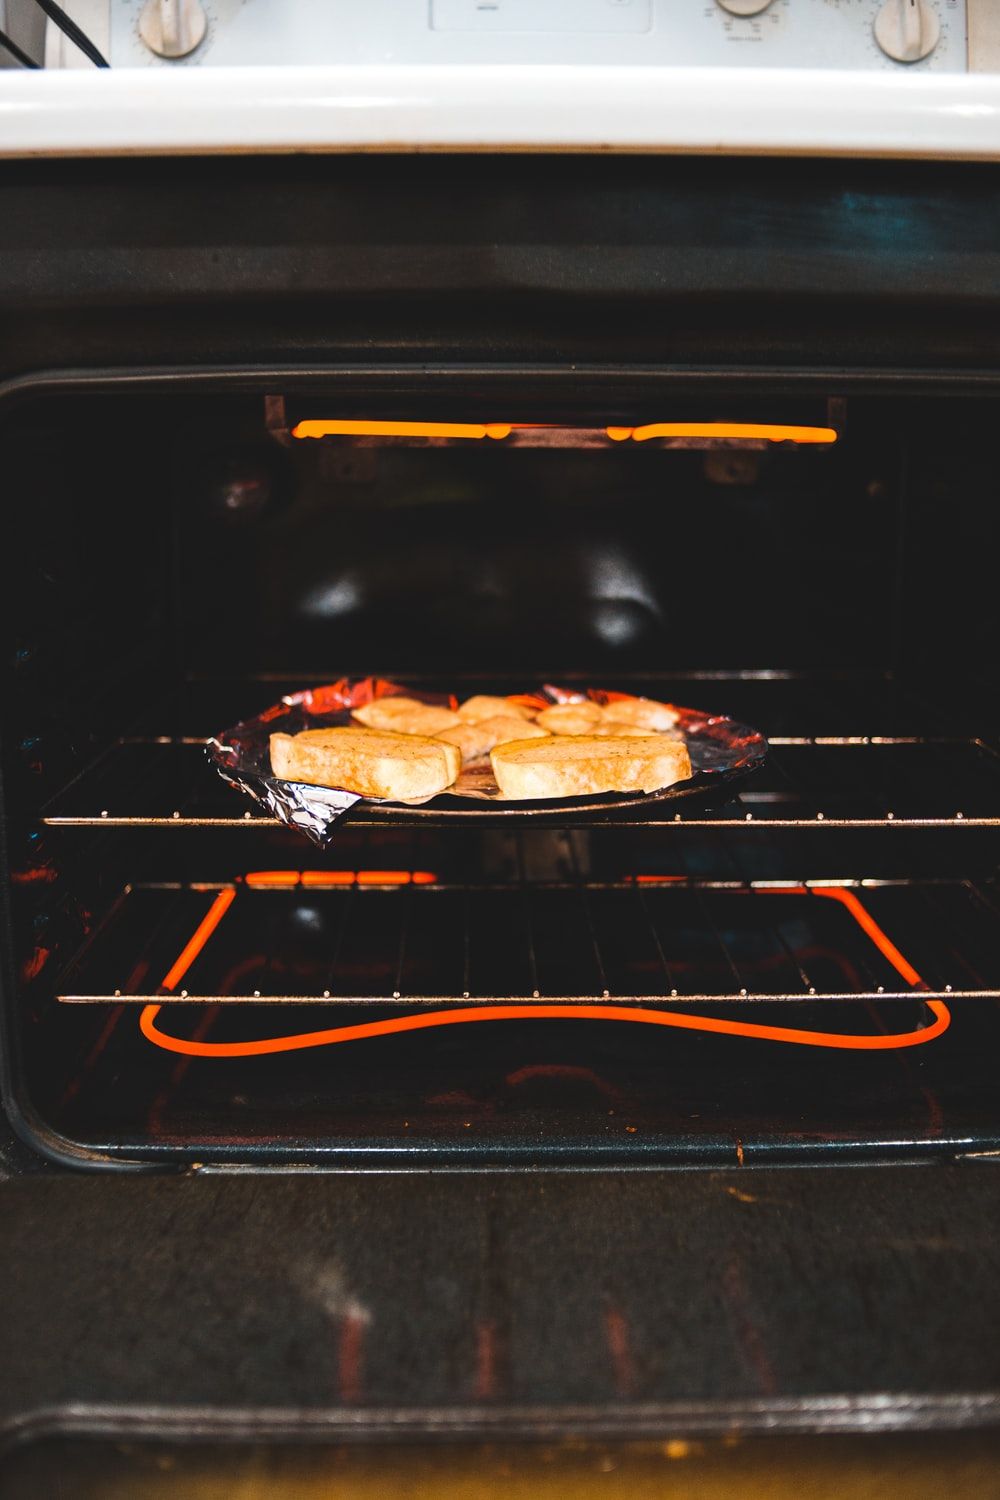 Oven Picture. Download Free Image